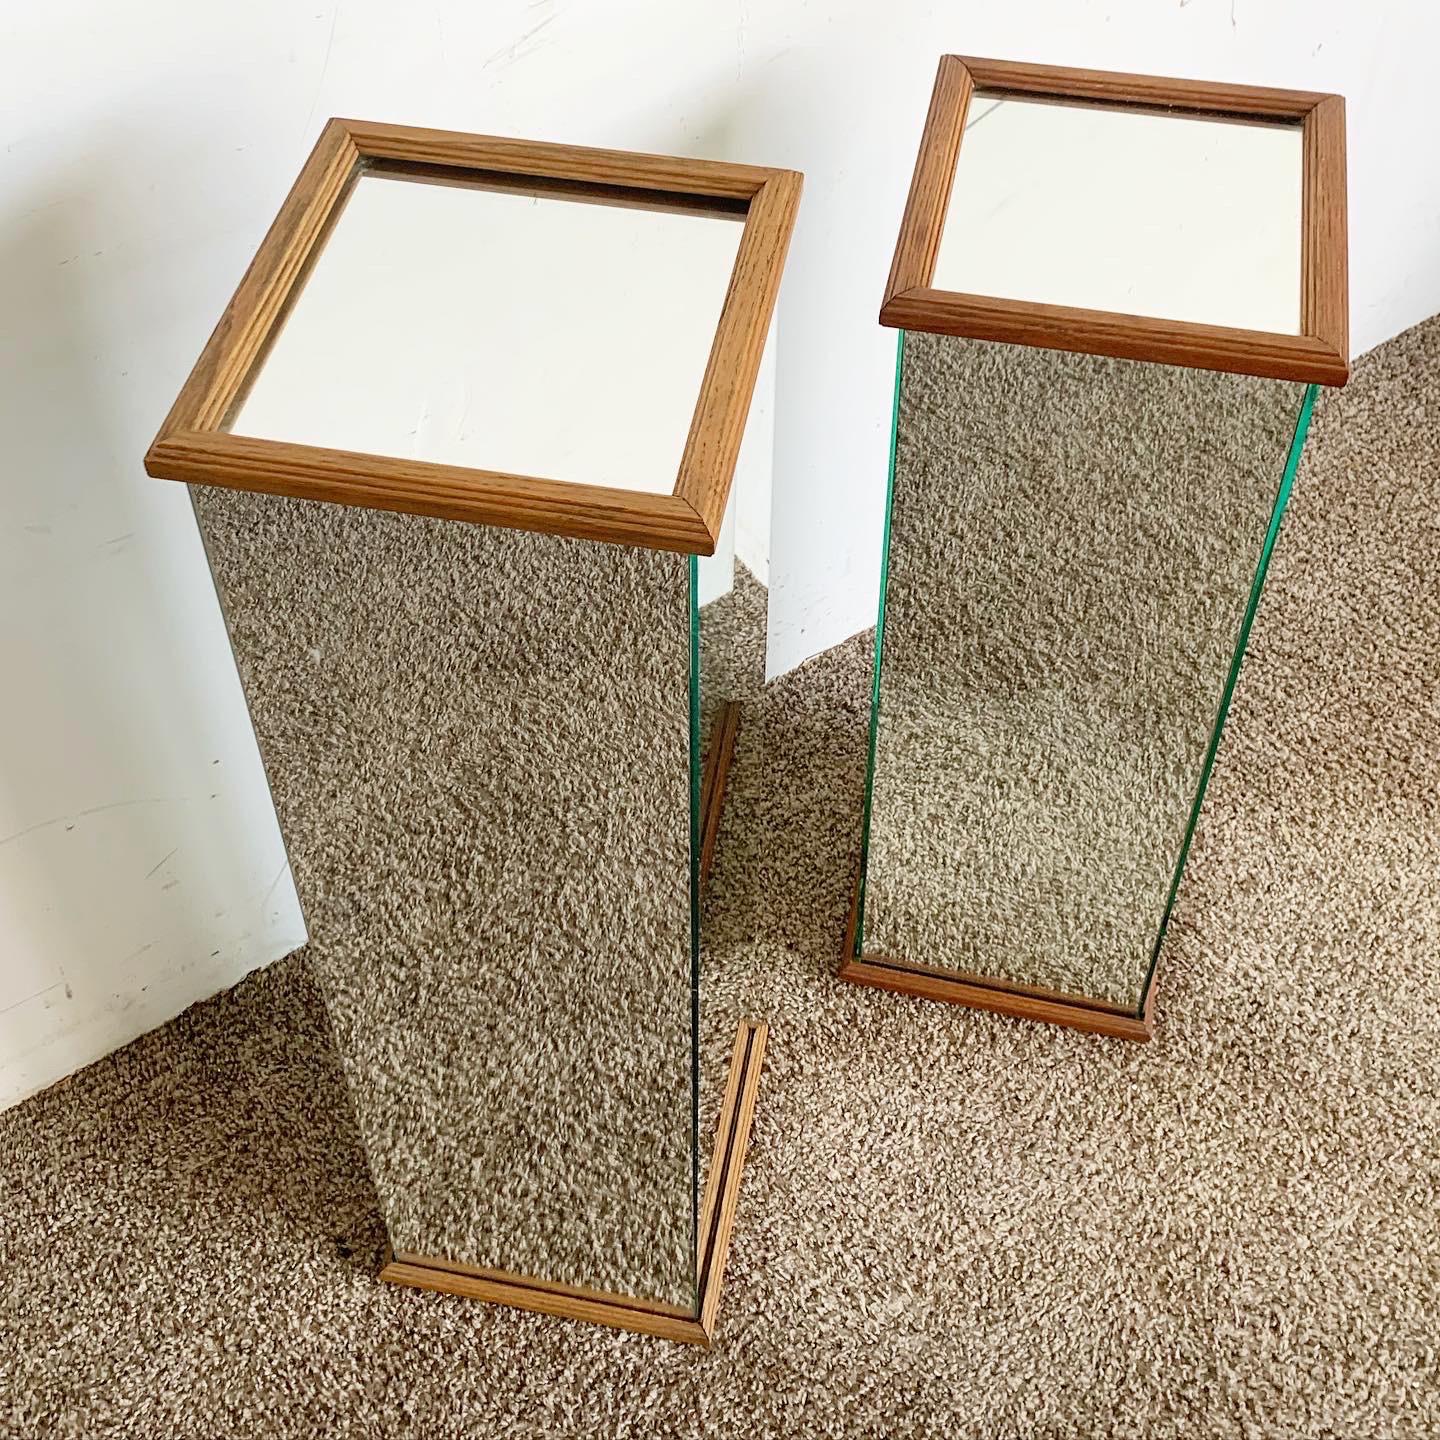 Post-Modern Postmodern Rectangular Prism With Wooden Trim Pedestal Side Tables - a Pair For Sale